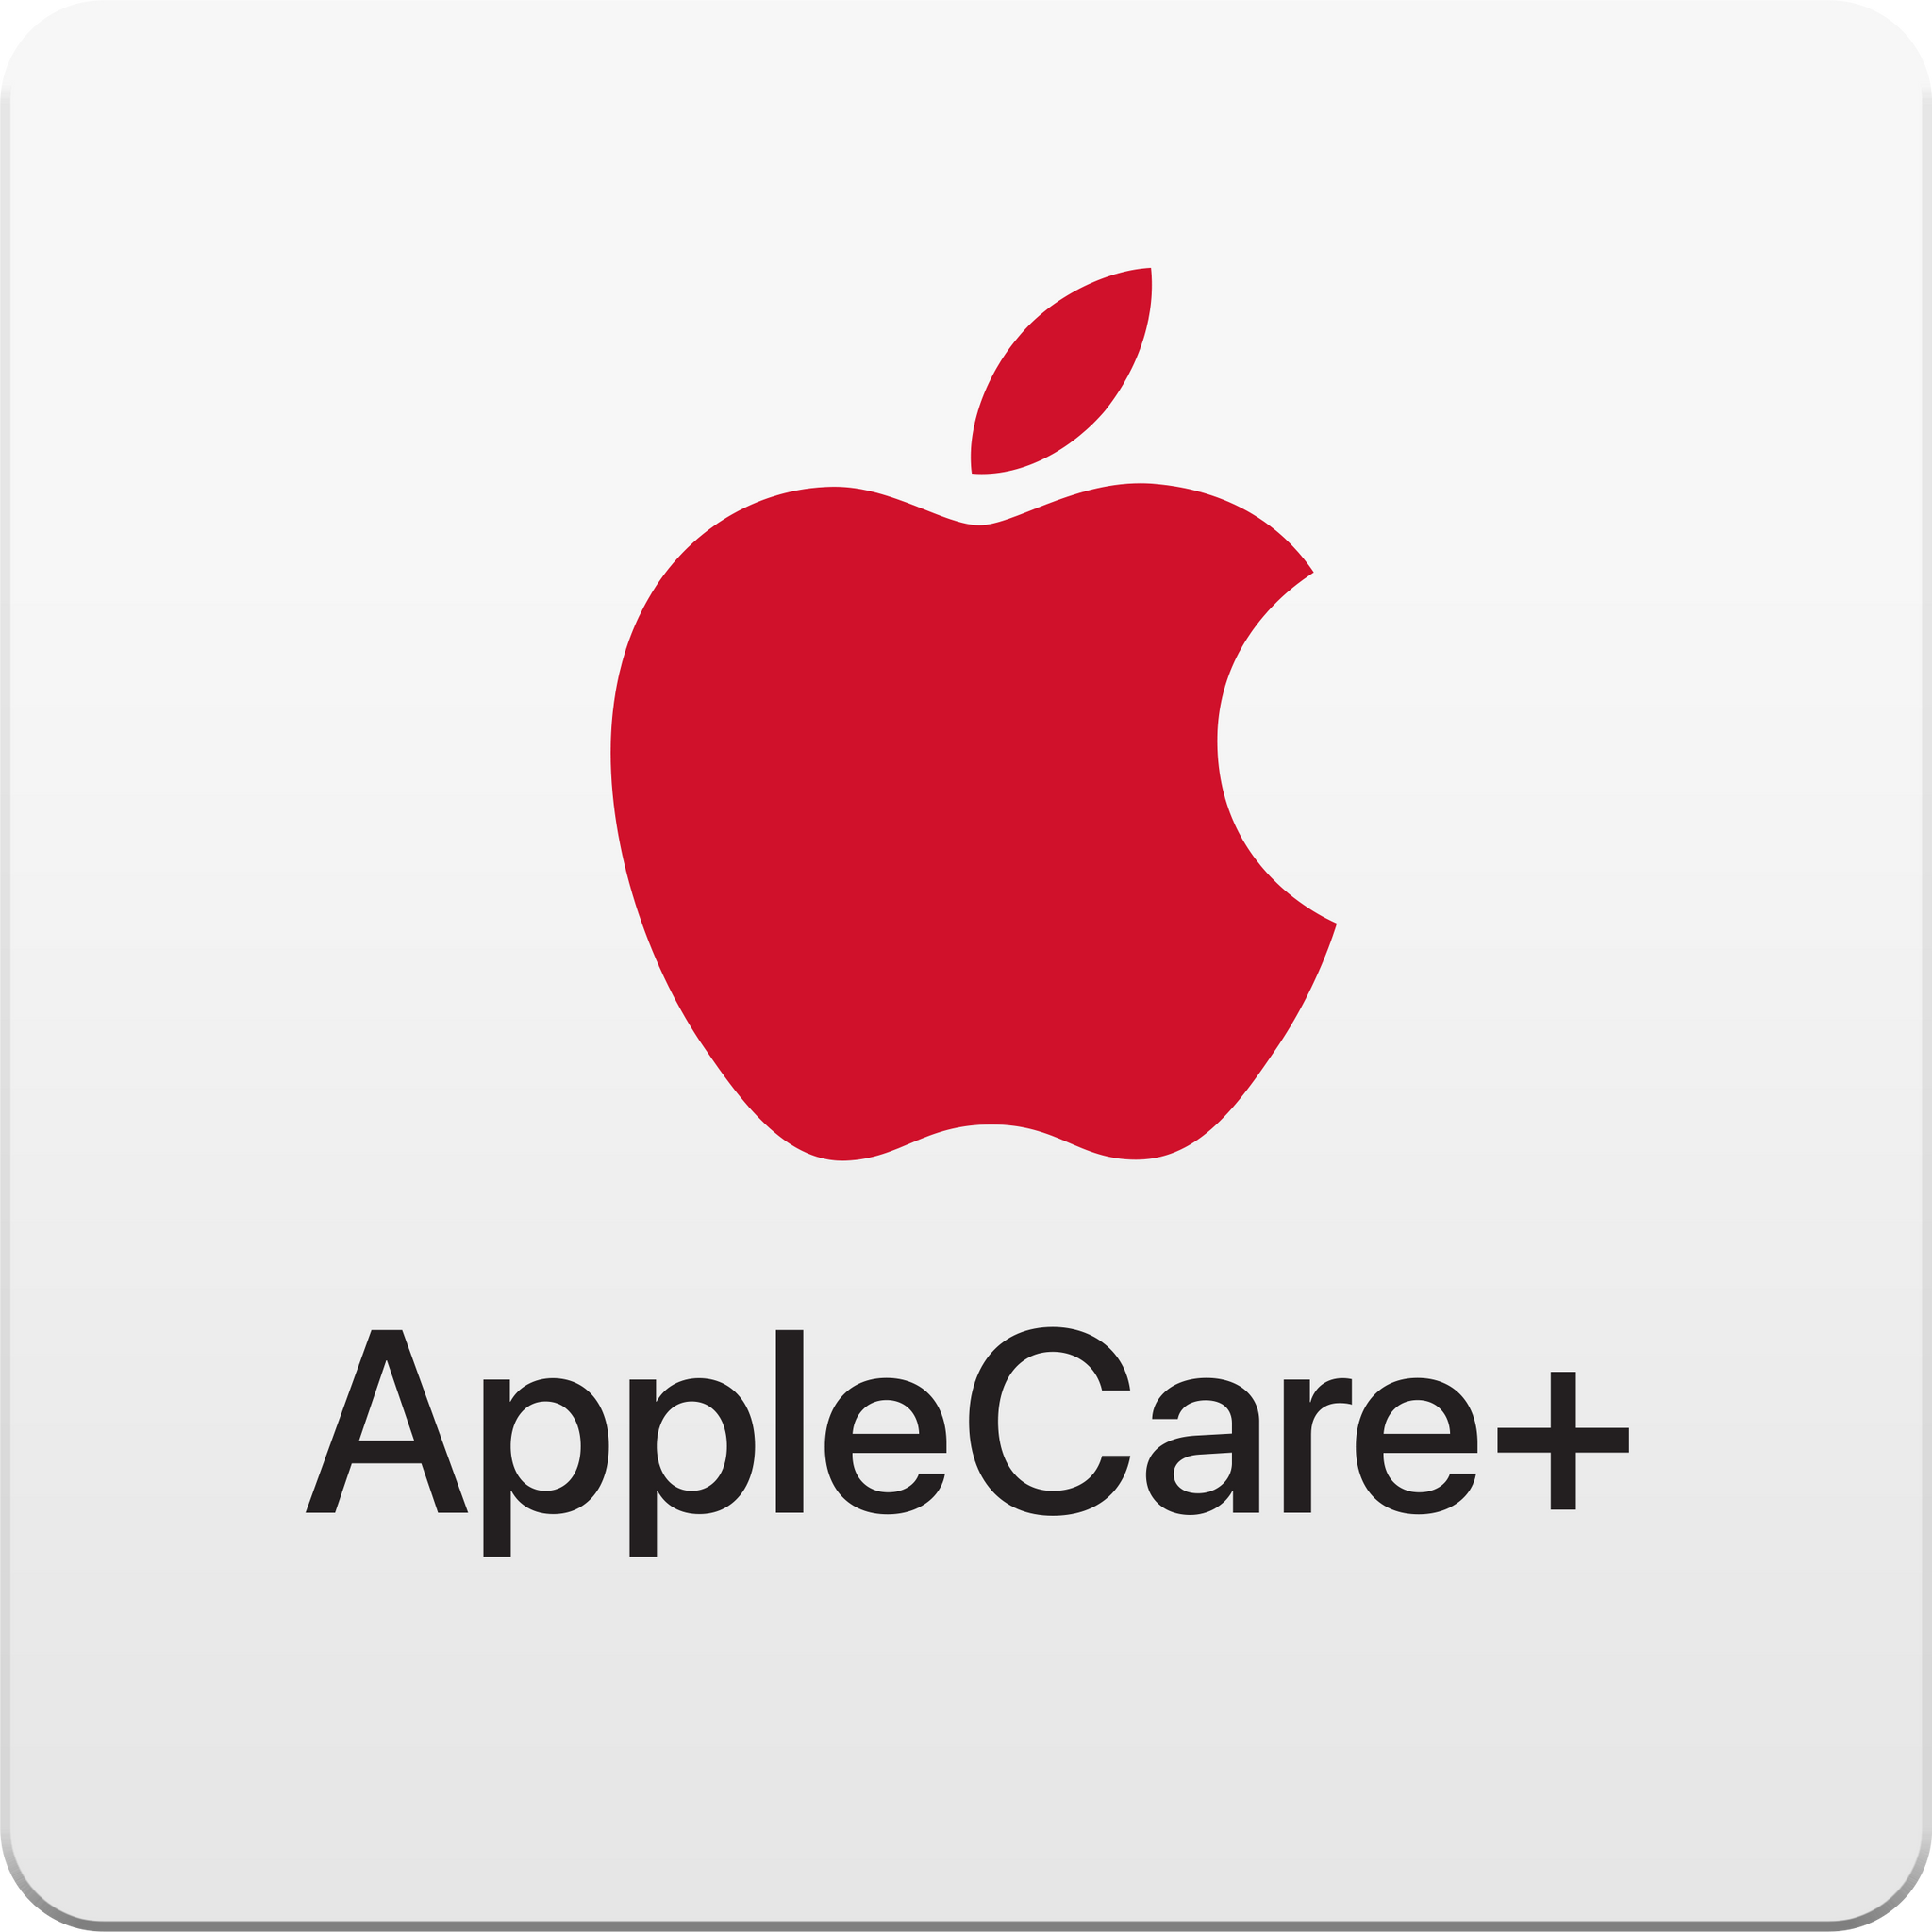 AppleCare+ for iPhone 13 Pro Max